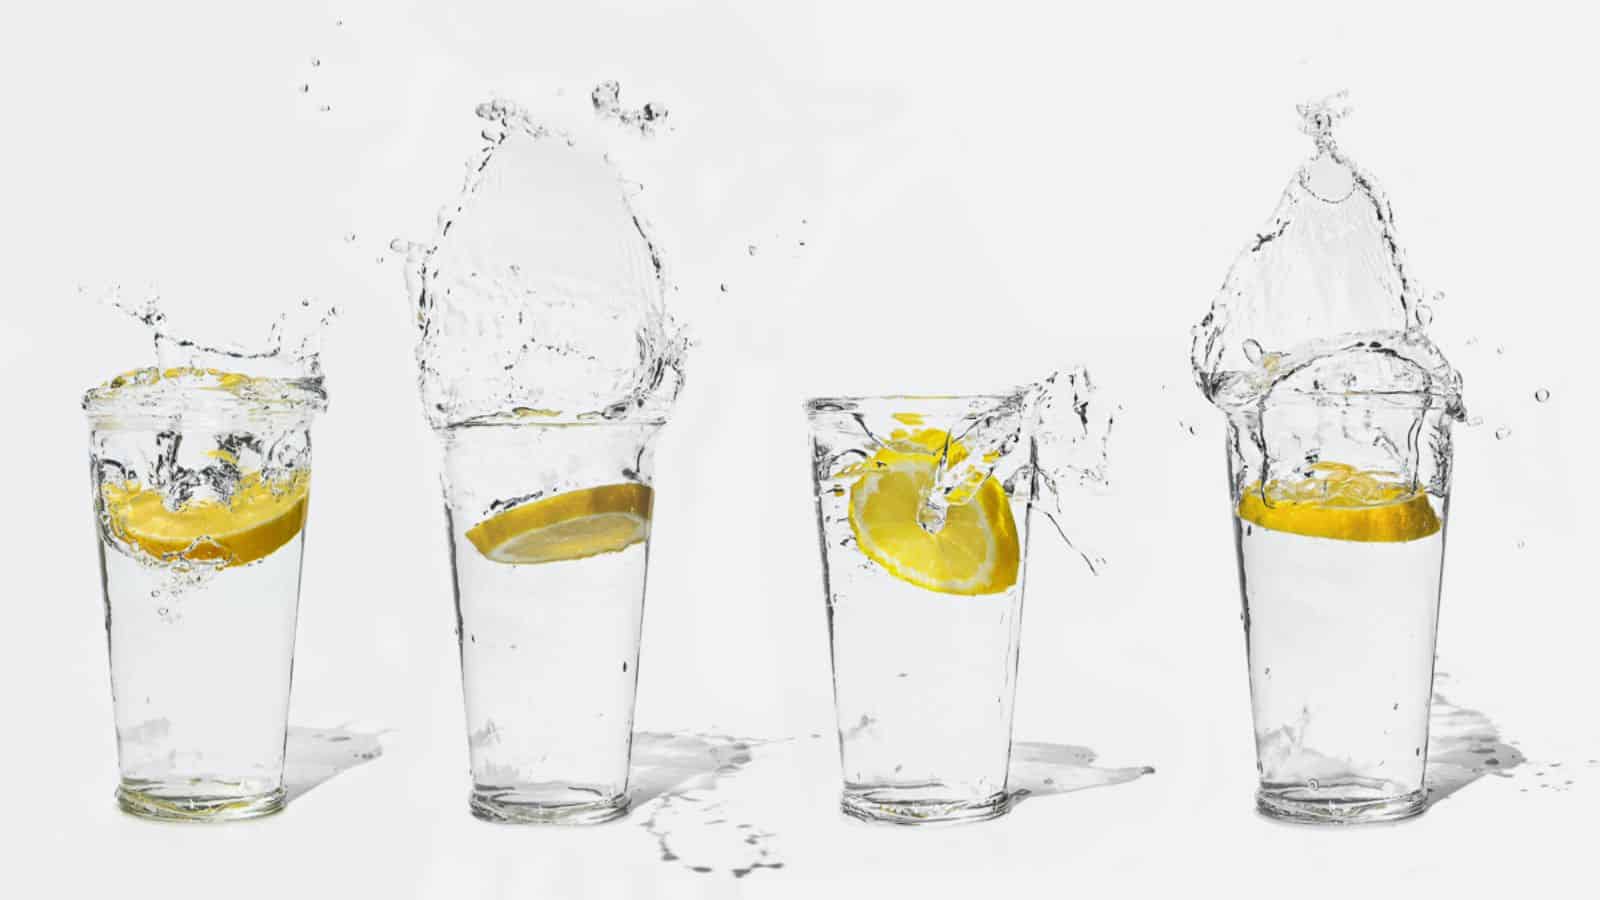 Glasses filled with water and slices of lemons dropped in. 